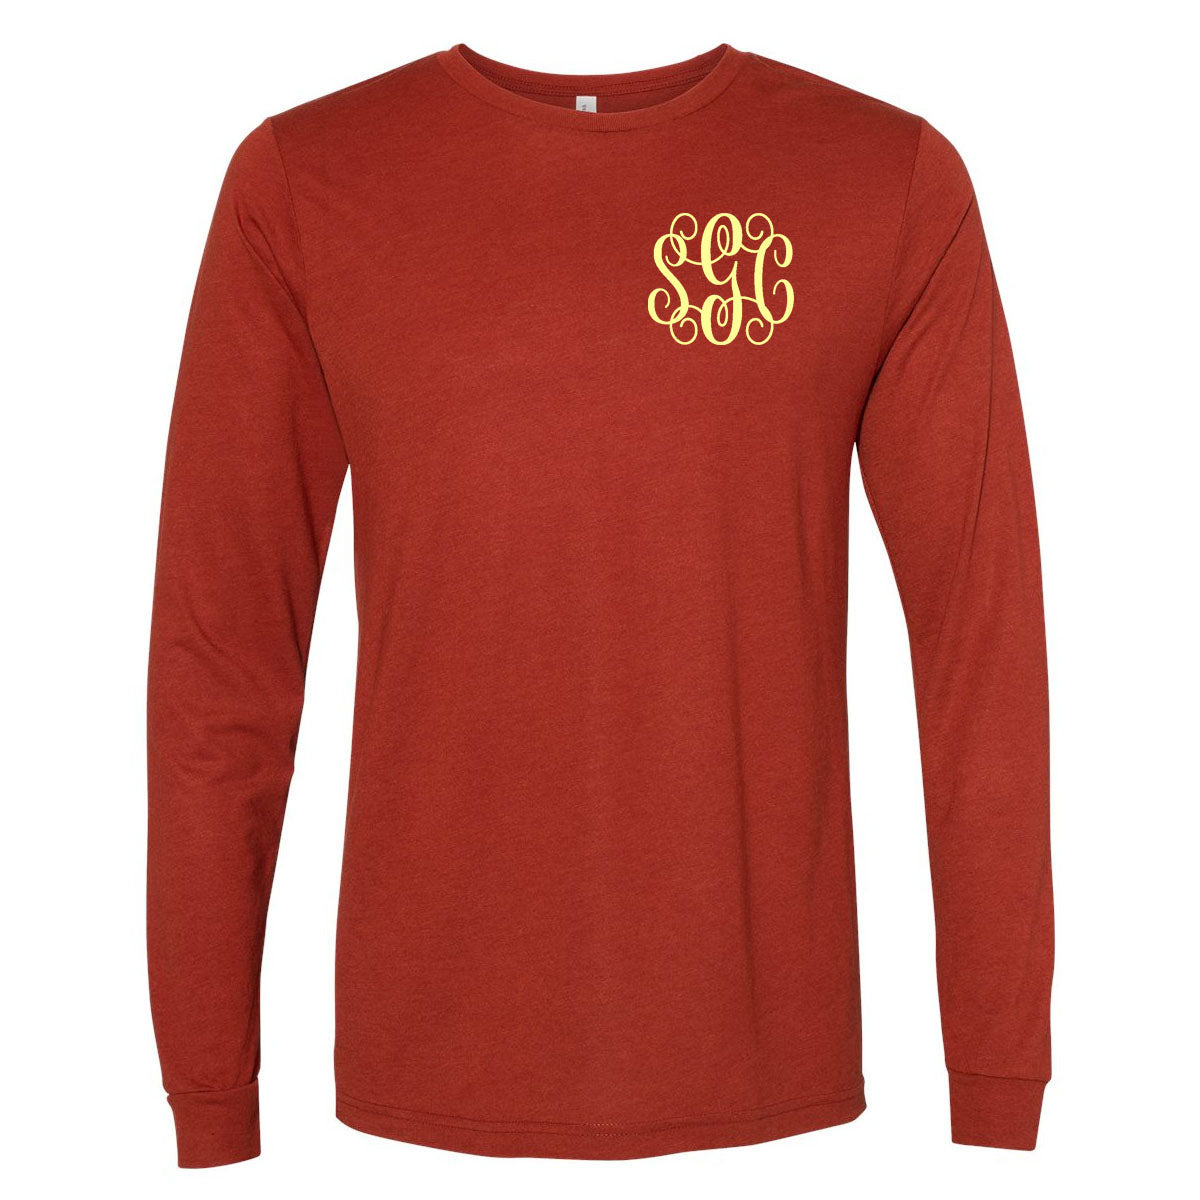 Brick Triblend Monogrammed (Left Chest) Long Sleeve Tee - Southern Grace Creations